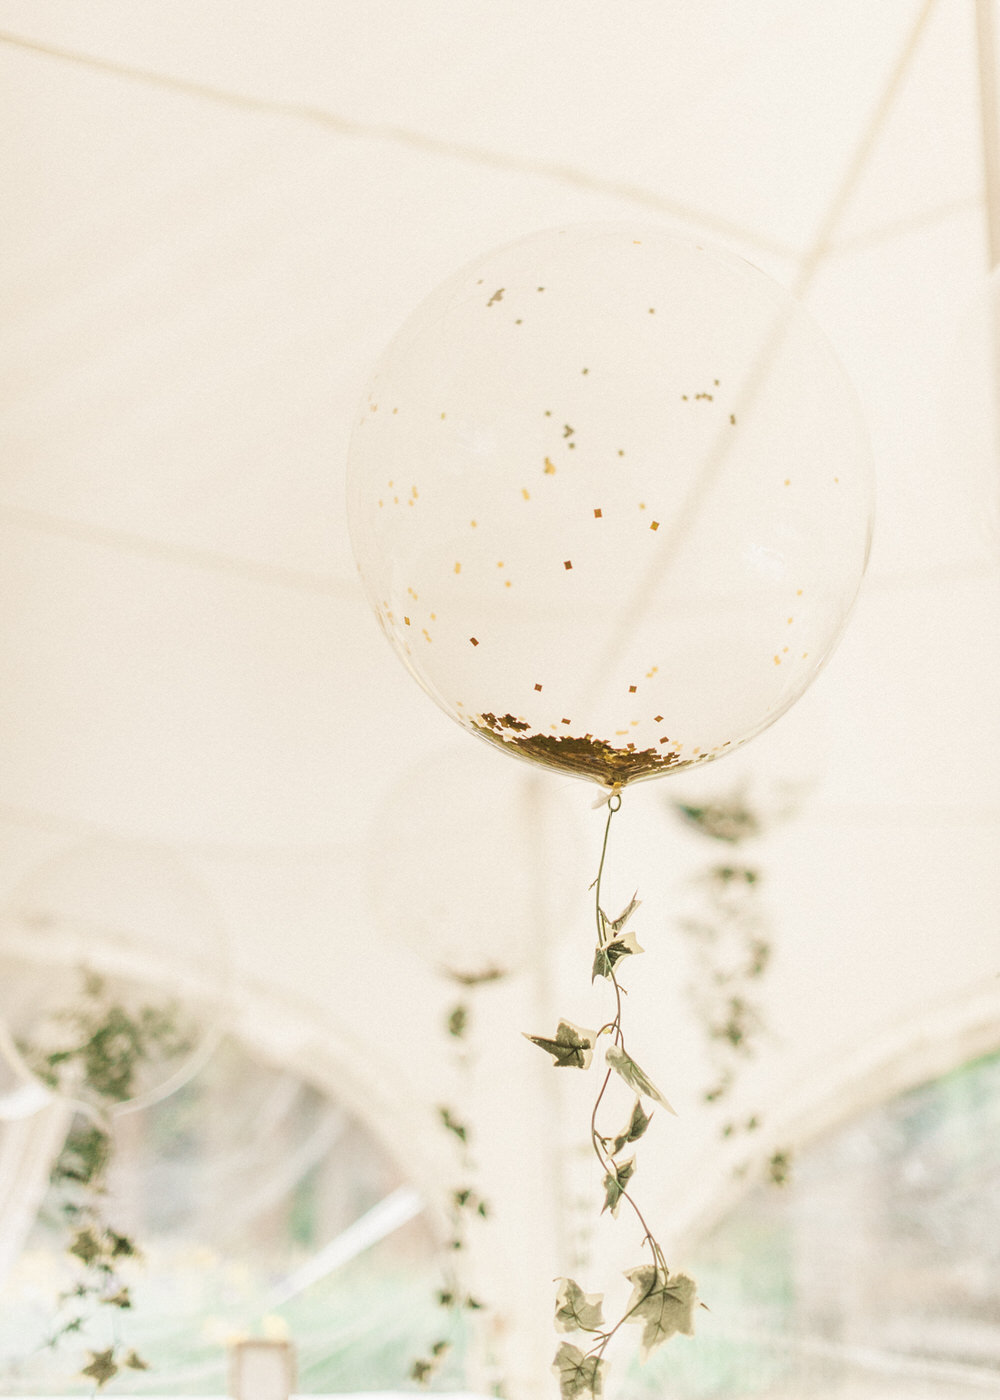 Helium balloons with floral tails | A Midsummer nights dream inspired children's birthday party with stunning floral, fairy entertainment, crafts and a picnic. Photos by Kate Nielen.